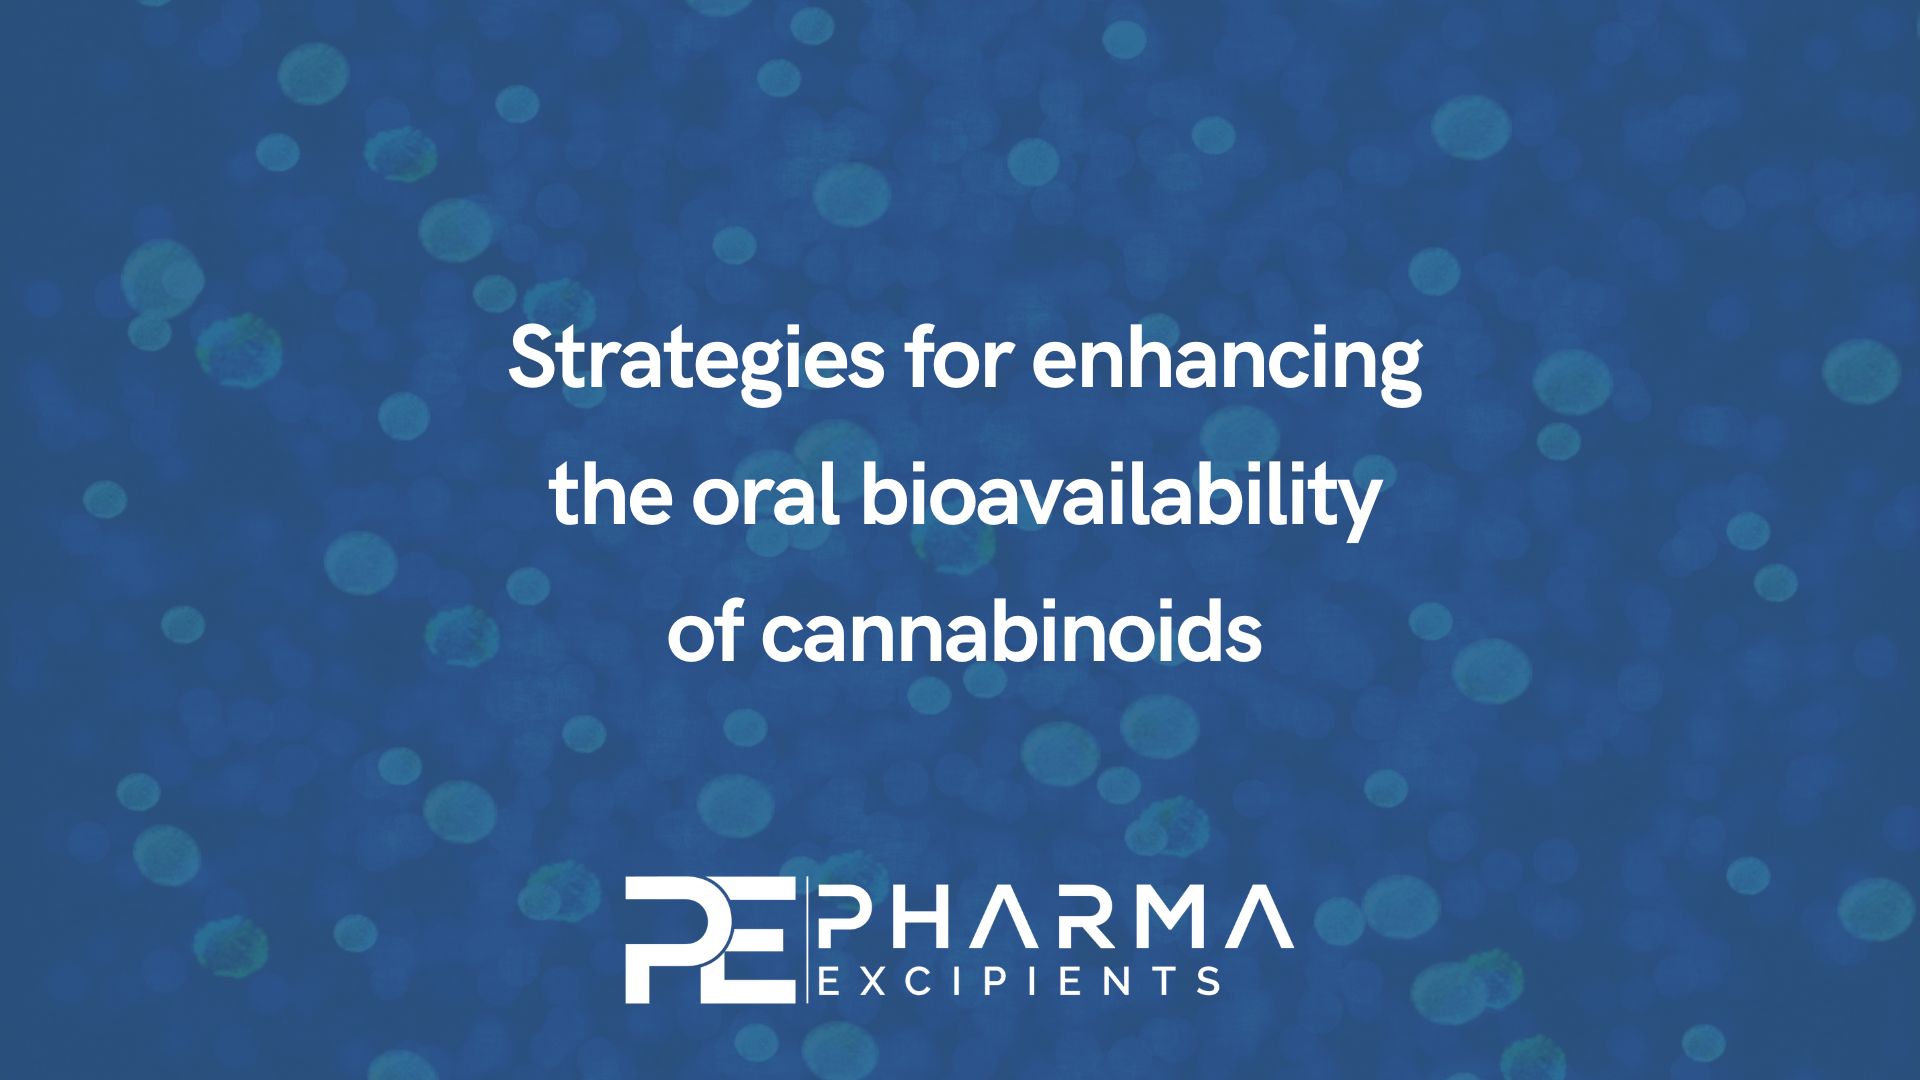 Strategies for enhancing the oral bioavailability of cannabinoids